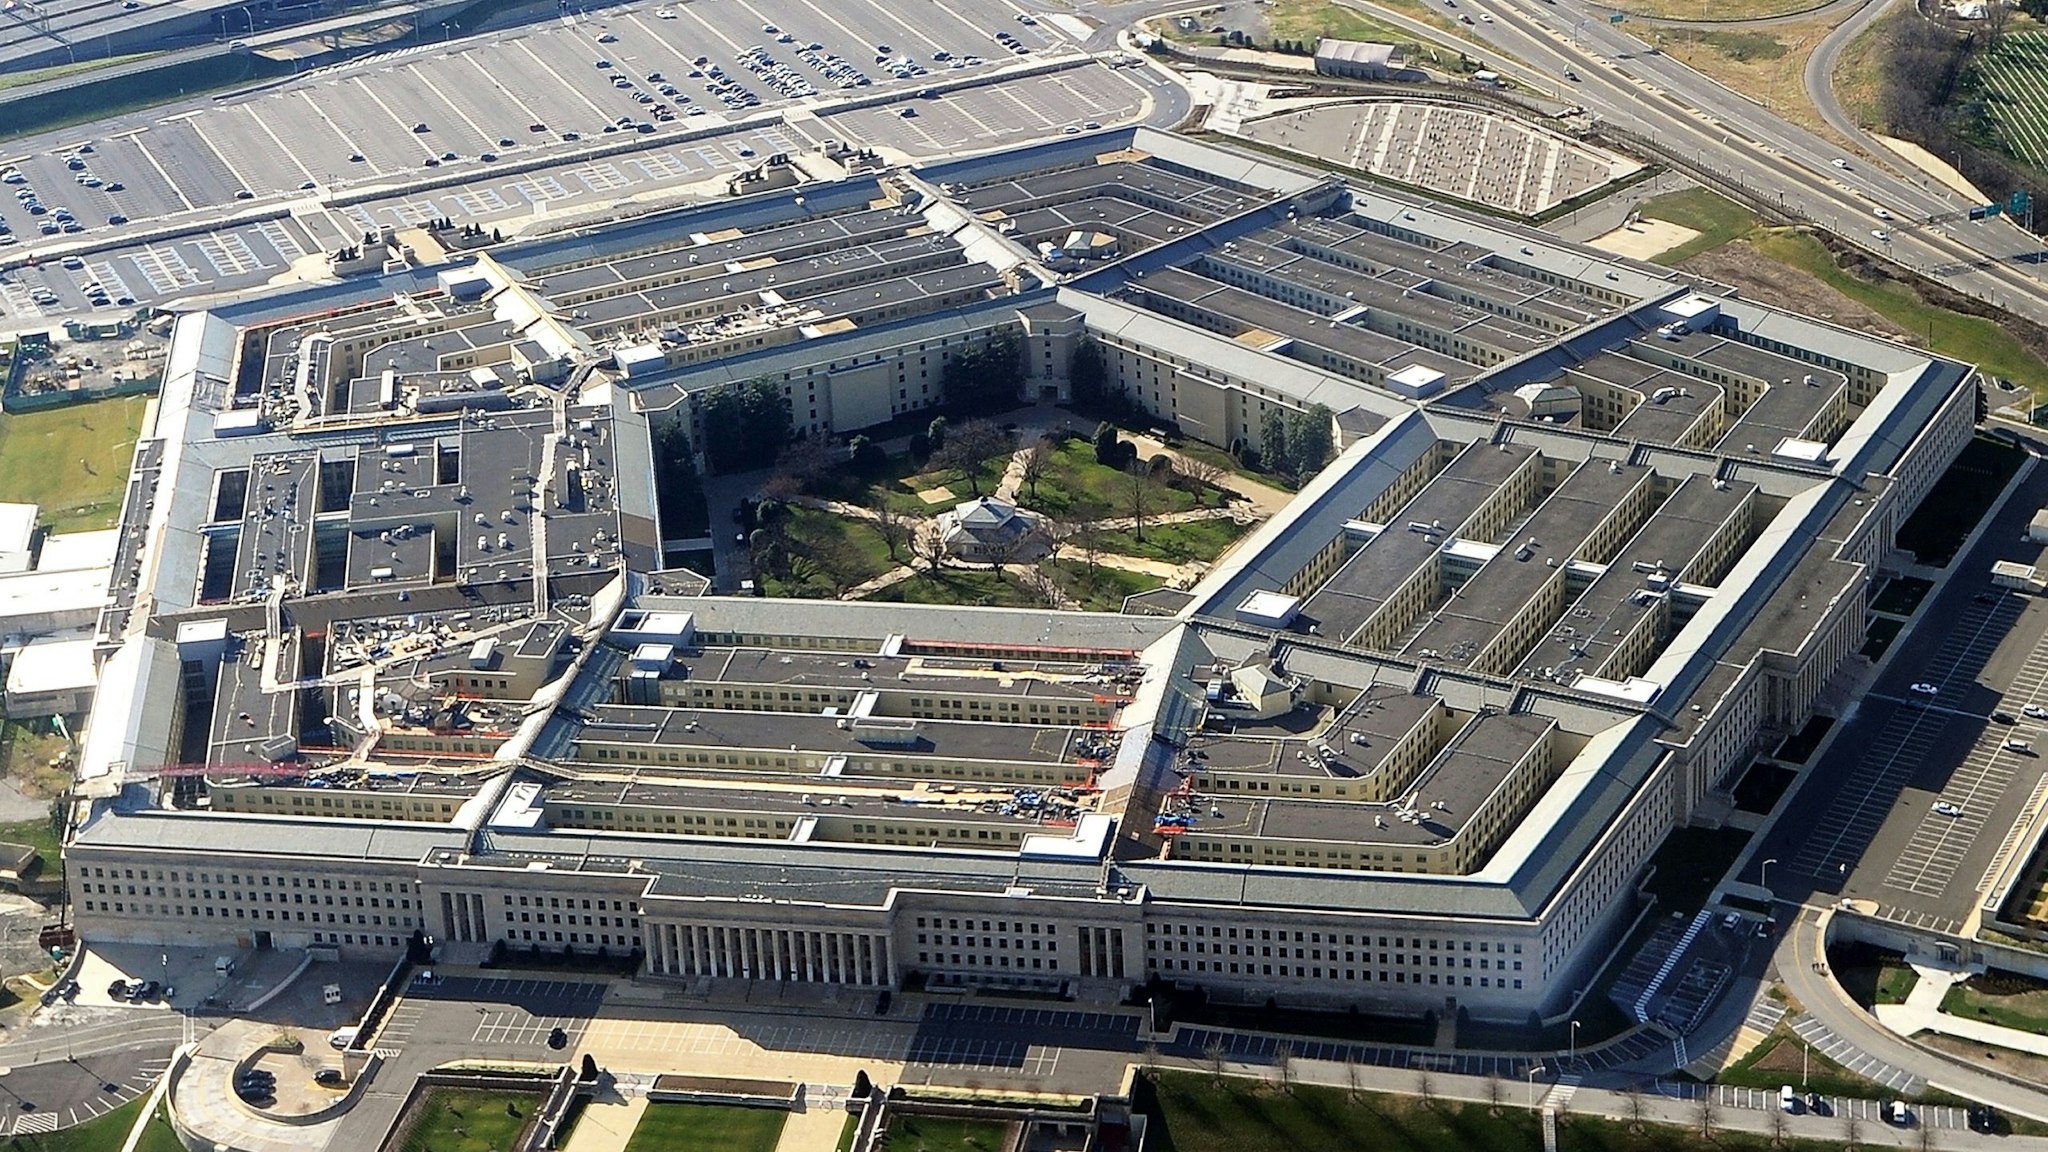 This picture taken 26 December 2011 shows the Pentagon building in Washington, DC. The Pentagon, which is the headquarters of the United States Department of Defense (DOD), is the world's largest office building by floor area, with about 6,500,000 sq ft (600,000 m2), of which 3,700,000 sq ft (340,000 m2) are used as offices. Approximately 23,000 military and civilian employees and about 3,000 non-defense support personnel work in the Pentagon.